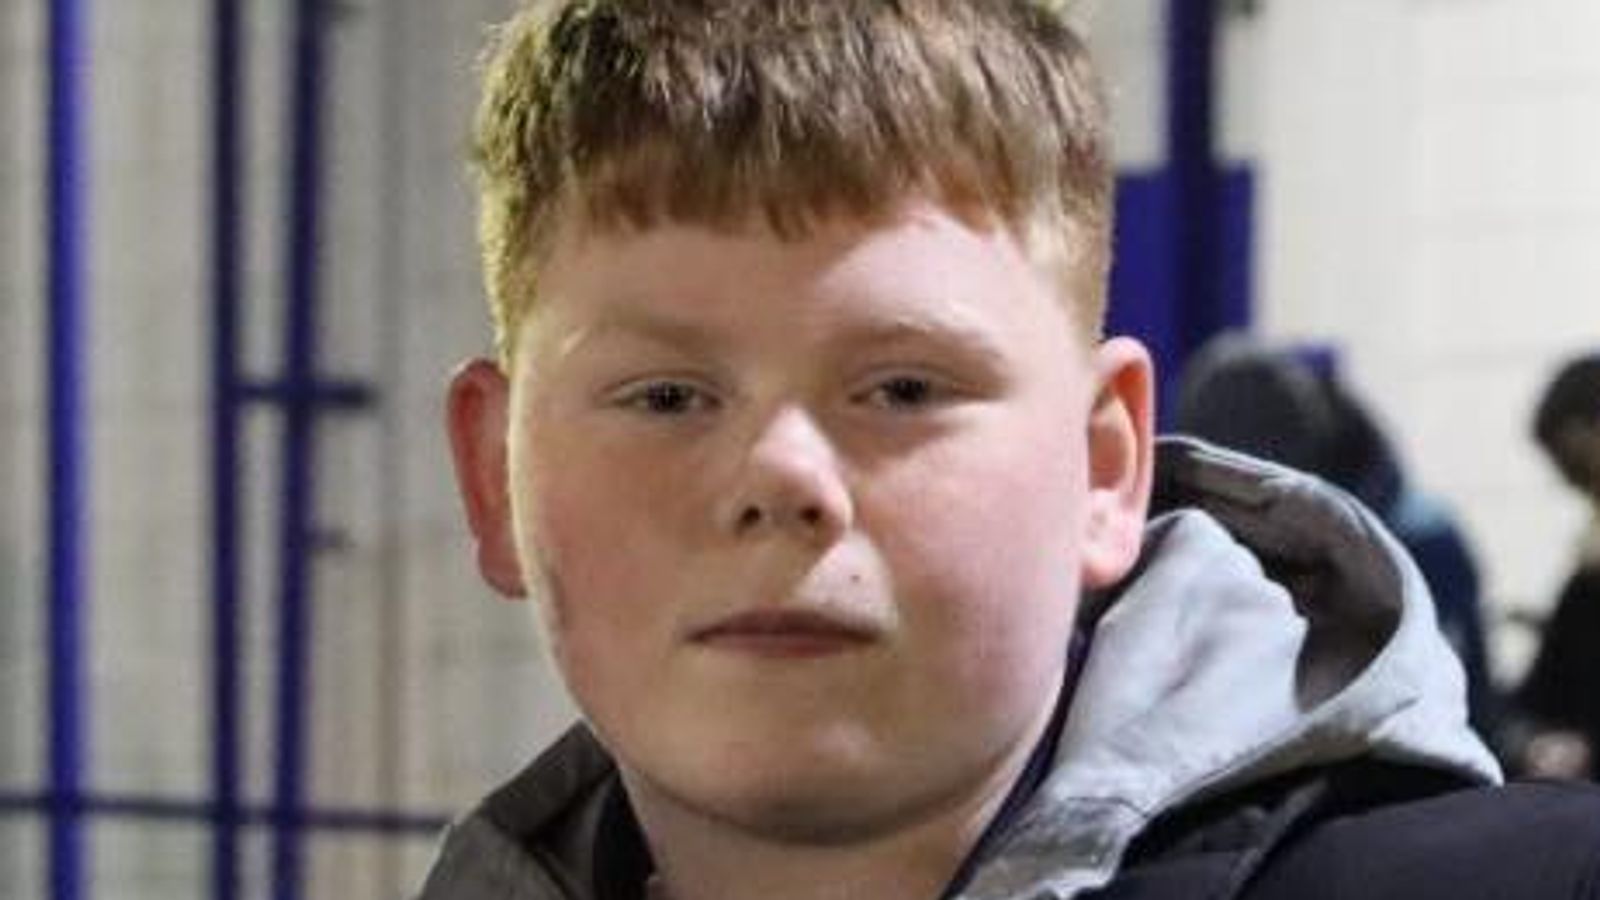 Leeds stabbing victim named as Alfie Lewis, 15, after attack near school in Horsforth